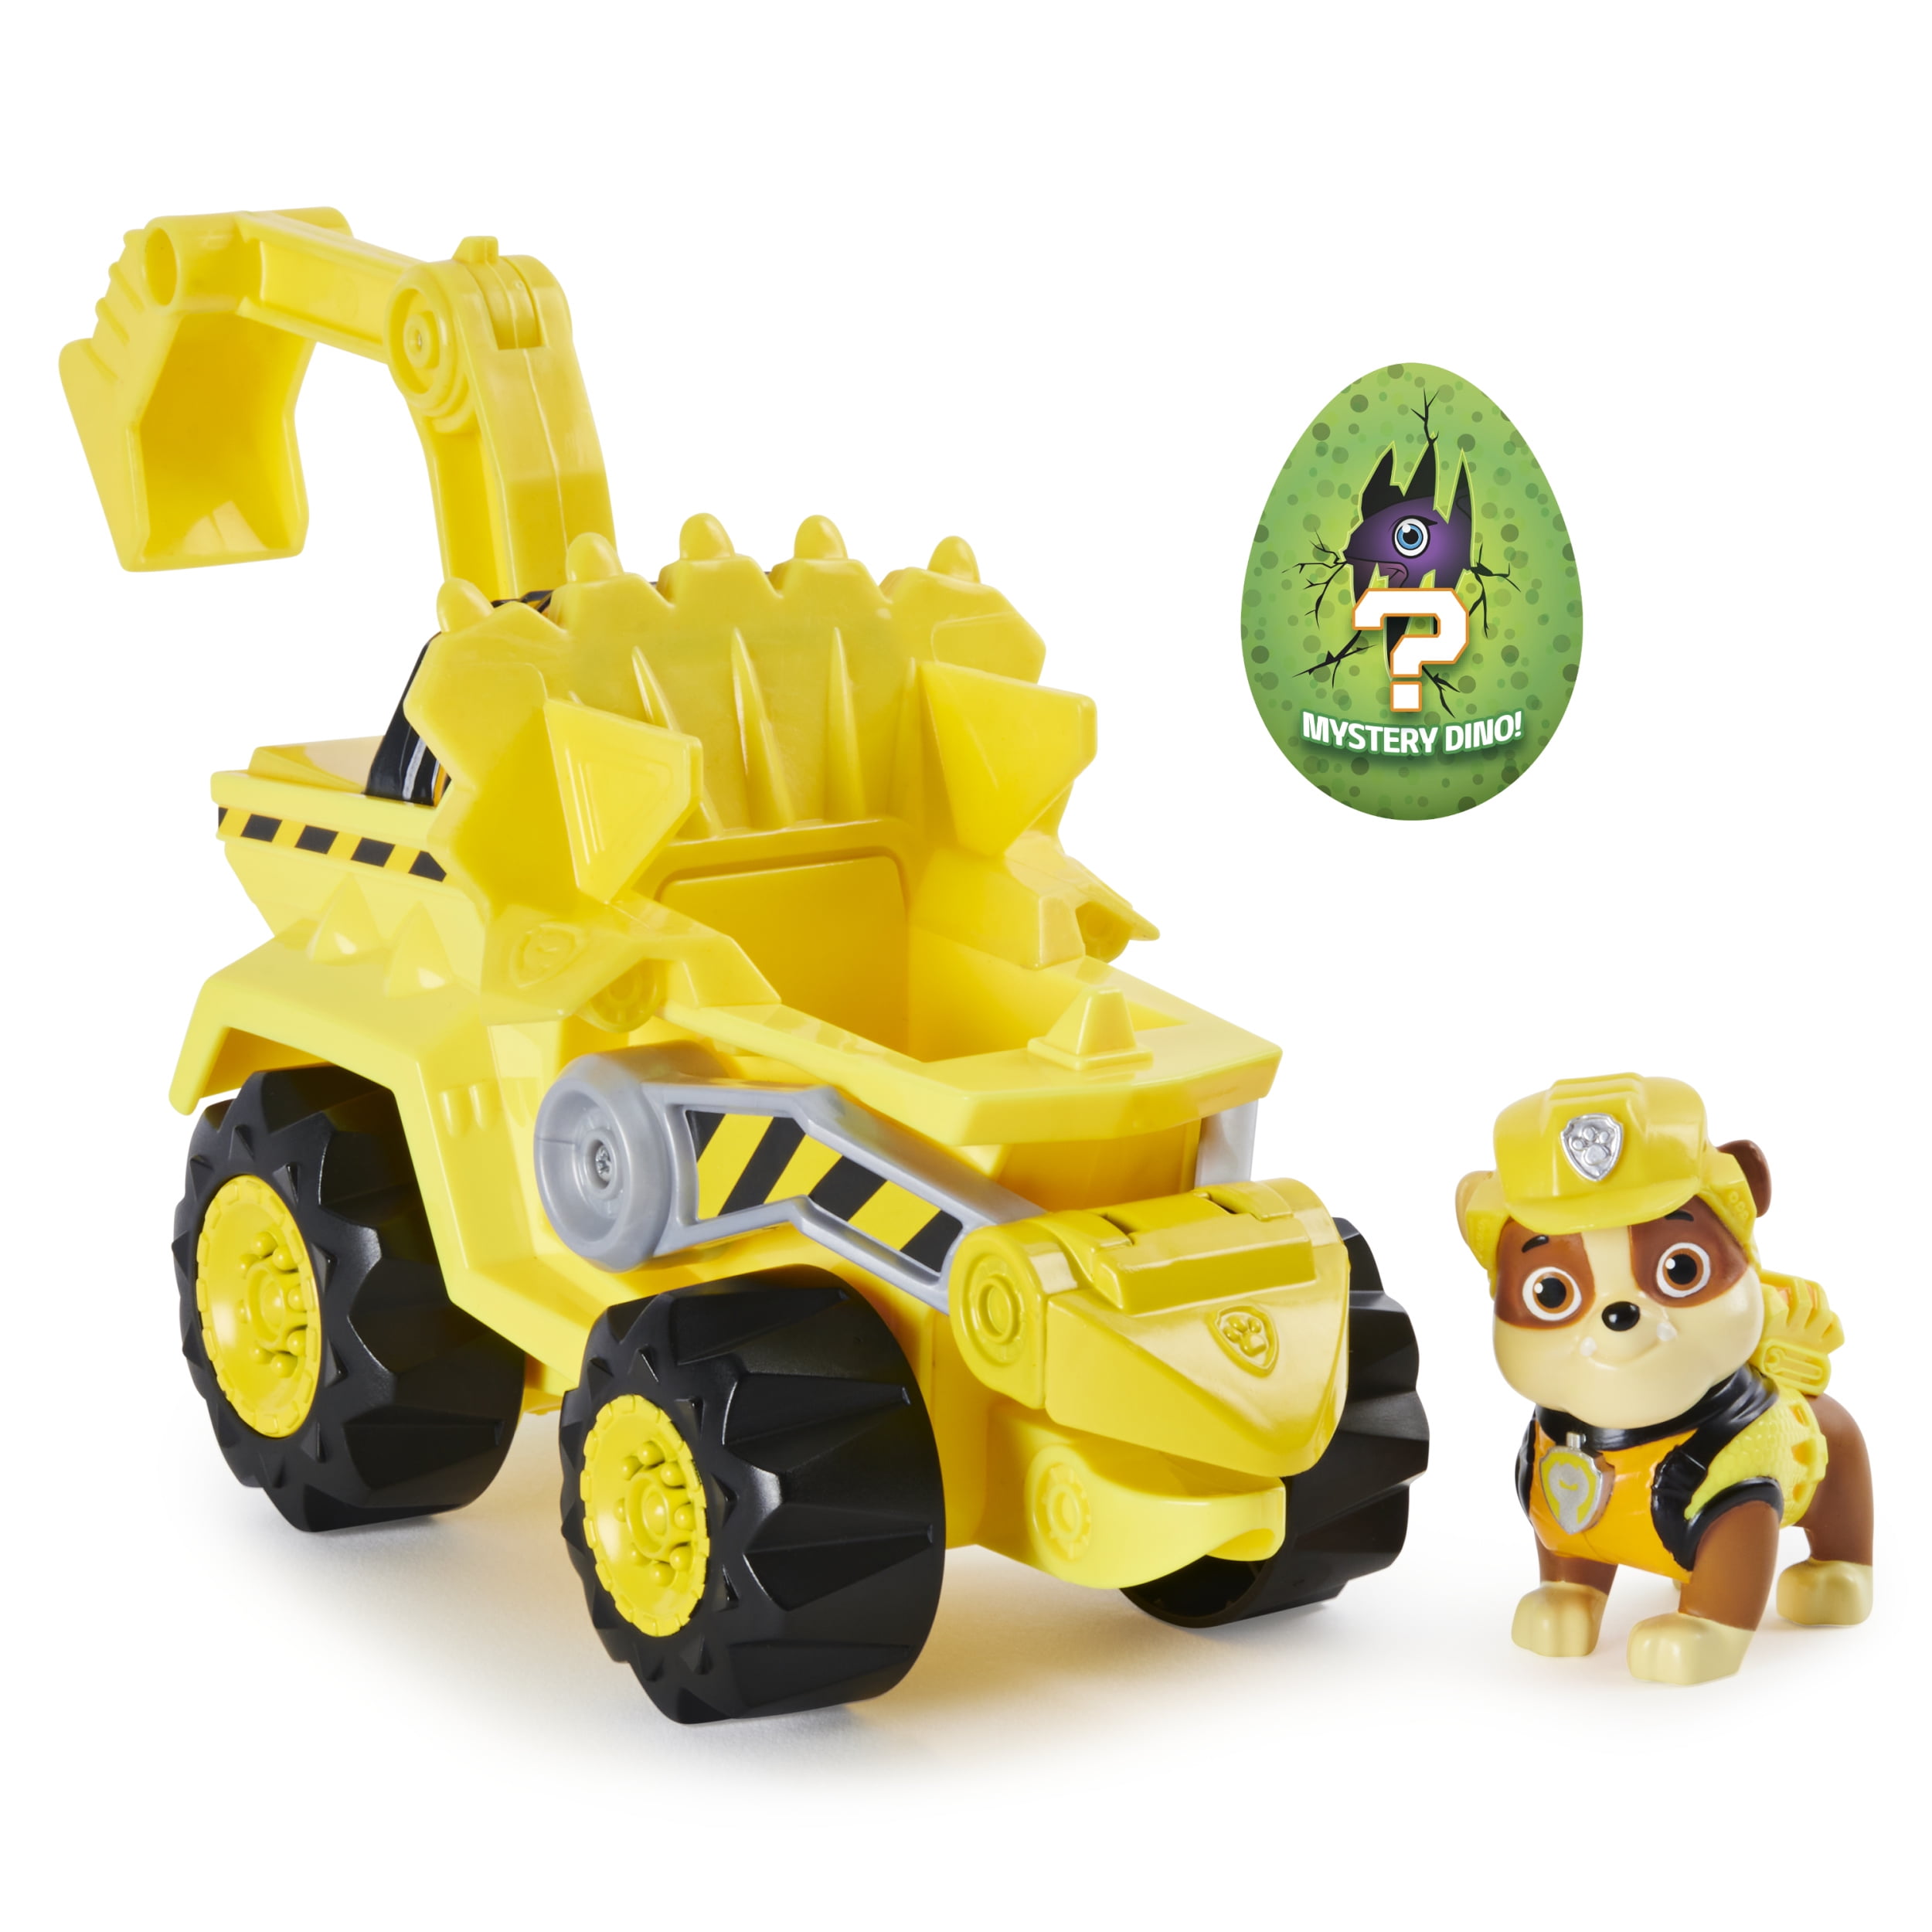 NEW Paw Patrol DINO RESCUE REX Deluxe VEHICLE PUPPY FIGURE Mystery Dinosaur Egg 